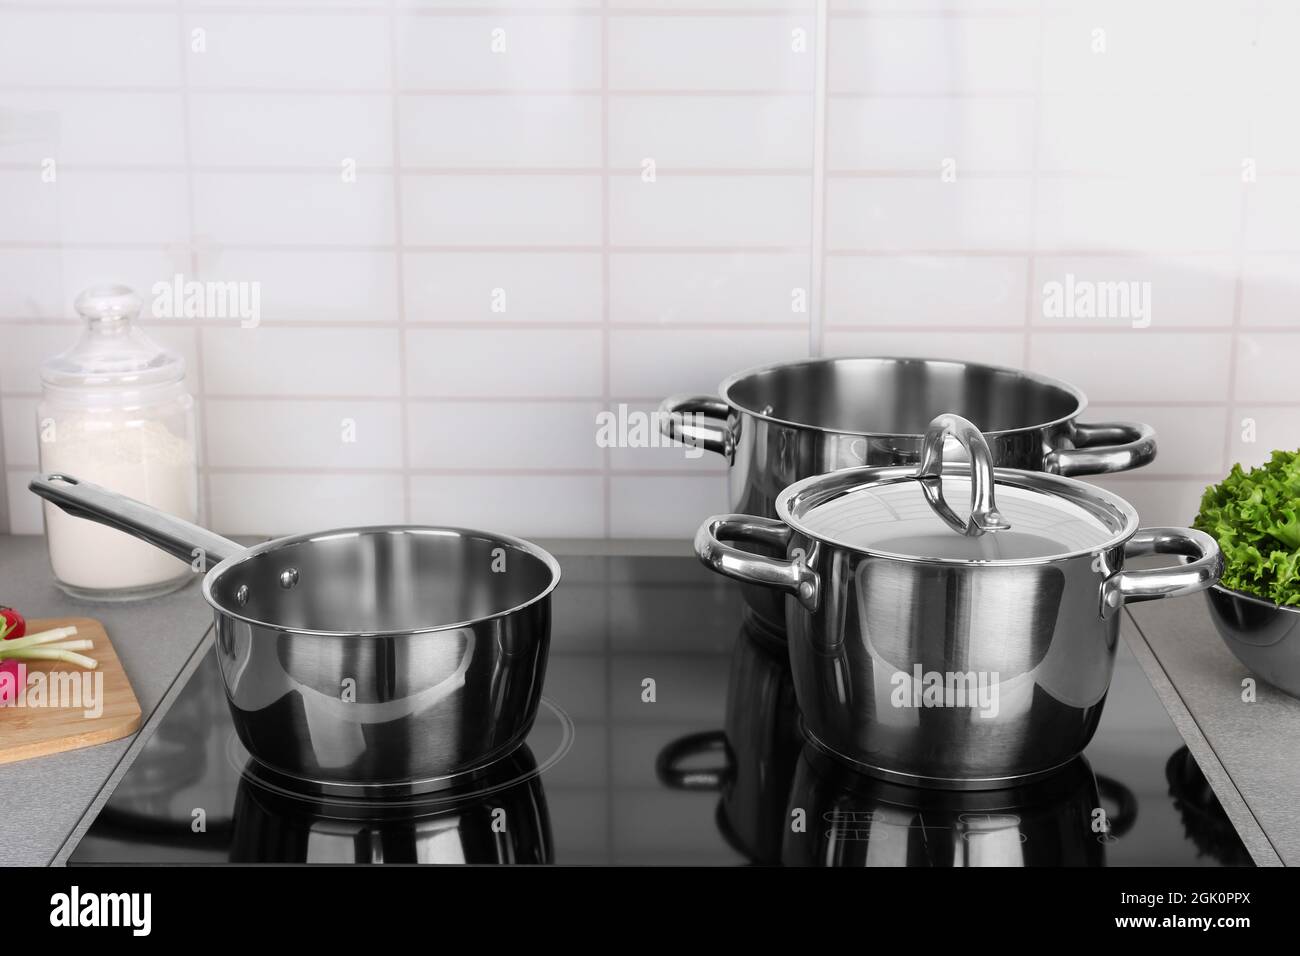 Utensils for cooking classes on electric stove in kitchen Stock Photo -  Alamy